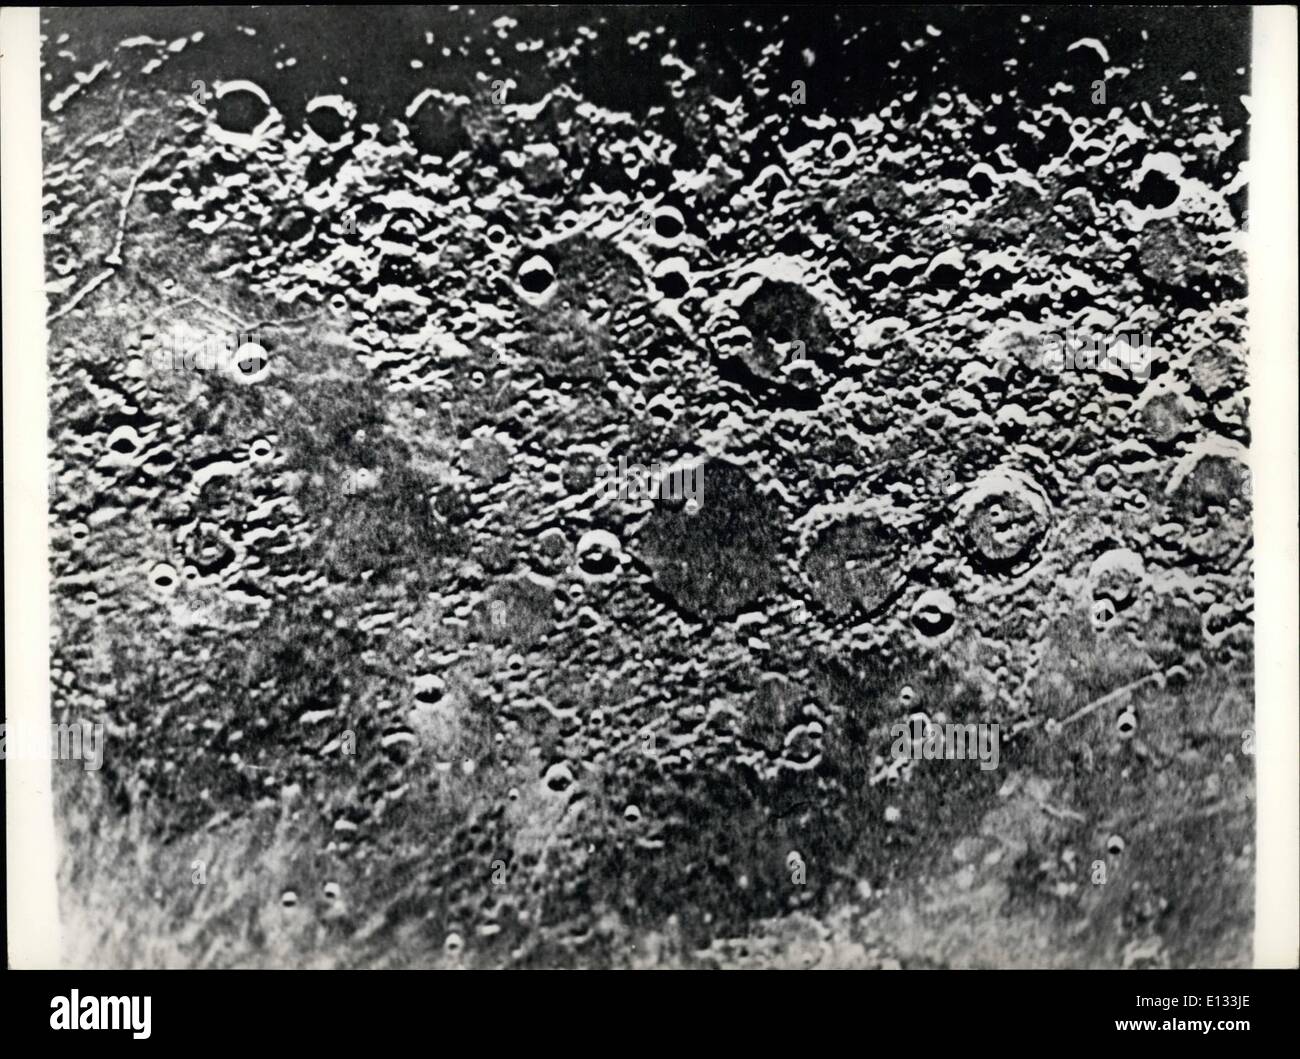 Feb. 26, 2012 - In the early November, The Russian scientist, Dr Kozyrov made successful observations on the moon's relief by means of the 50 inch iced alterations in the illumination of the ''Alphonsus'' crater. On obtaining spectroscopic photographs of the crater, he came to the conclusion that Volcano eruption had occurred in the moon. The scientist Continues to study the obtained data, in order to determine chemical composition of the emitted gases and to clear up the physical aspect of the phenomen. Photo shows Dr. Kozyrev's photograph of the moonsurface. Stock Photo